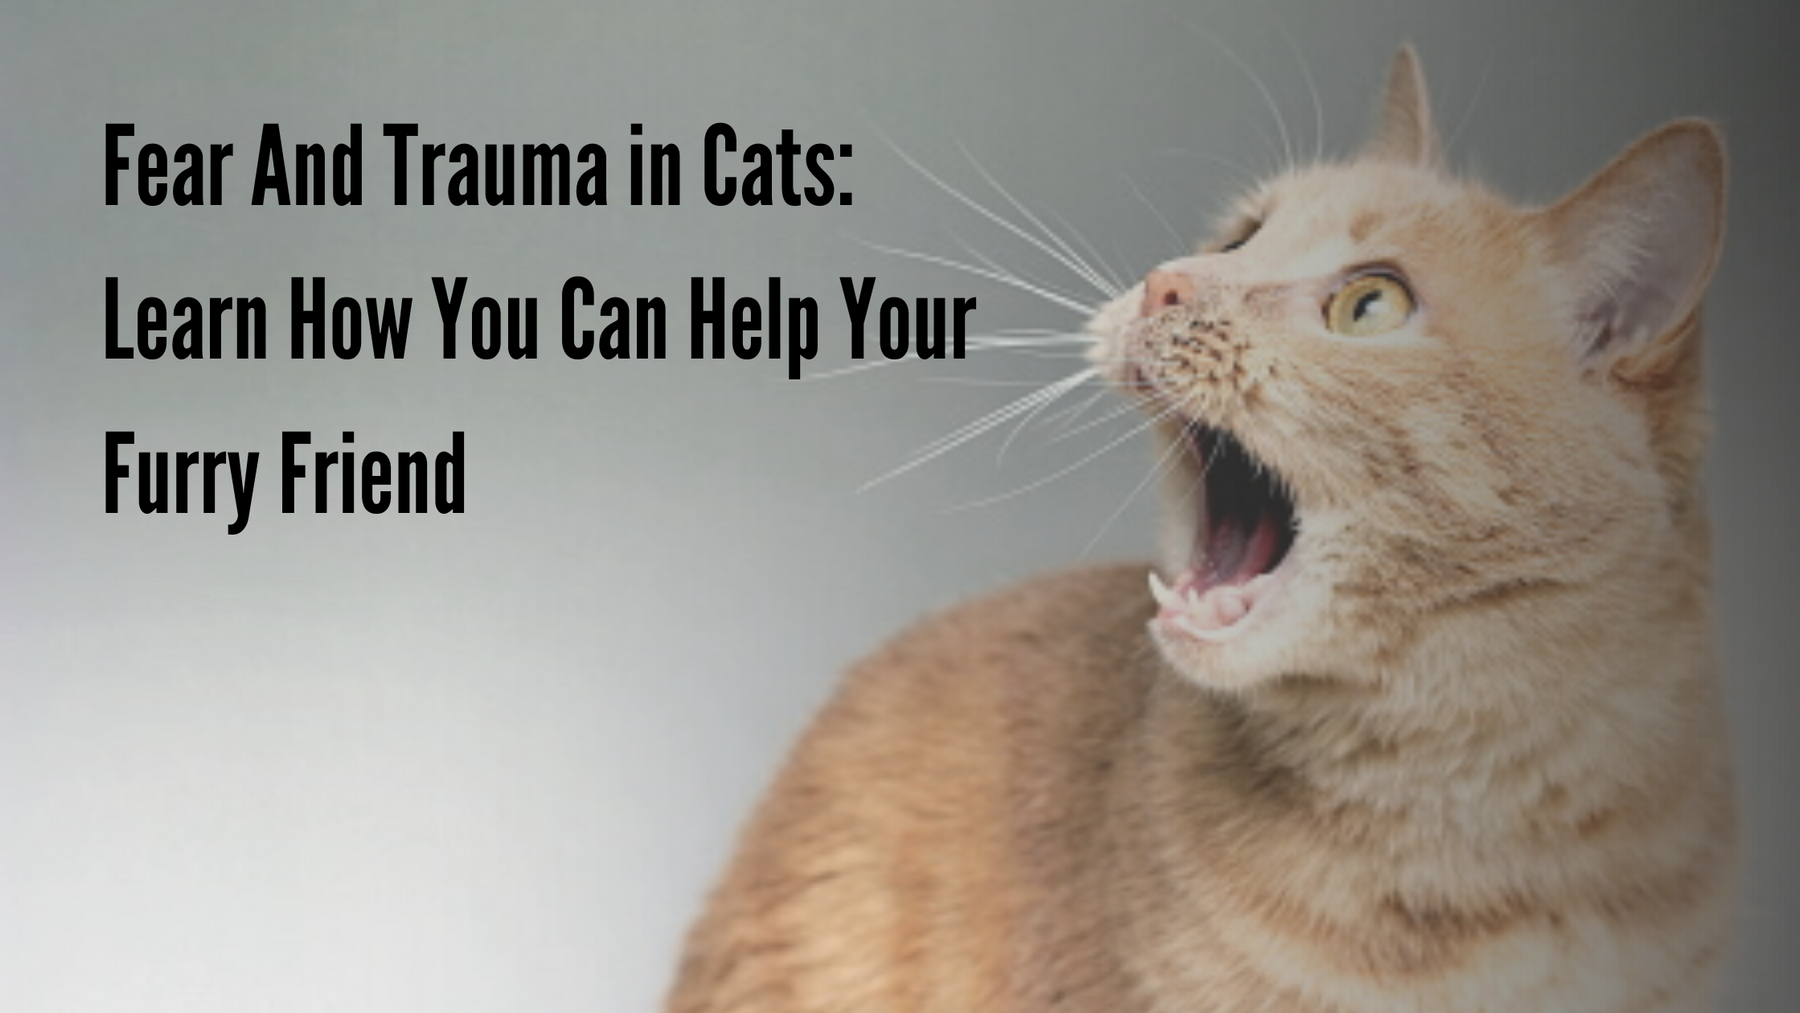 Fear And Trauma in Cats: Learn How You Can Help Your Furry Friend